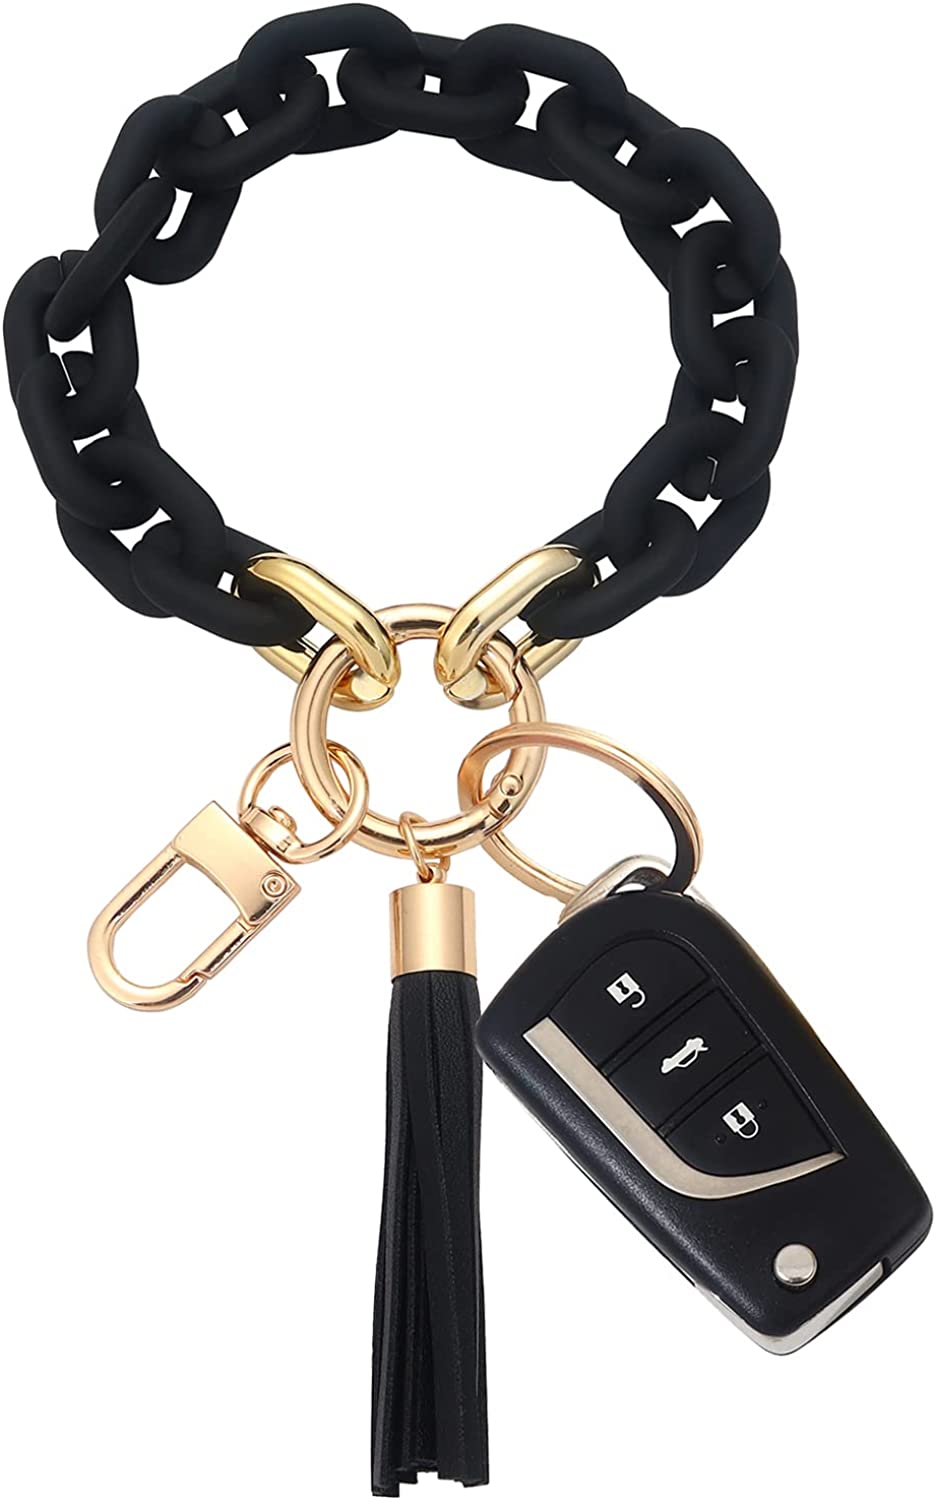 Chunky Chain Link Keychain Bracelet for Hands Free Phone - The Kindness Cause